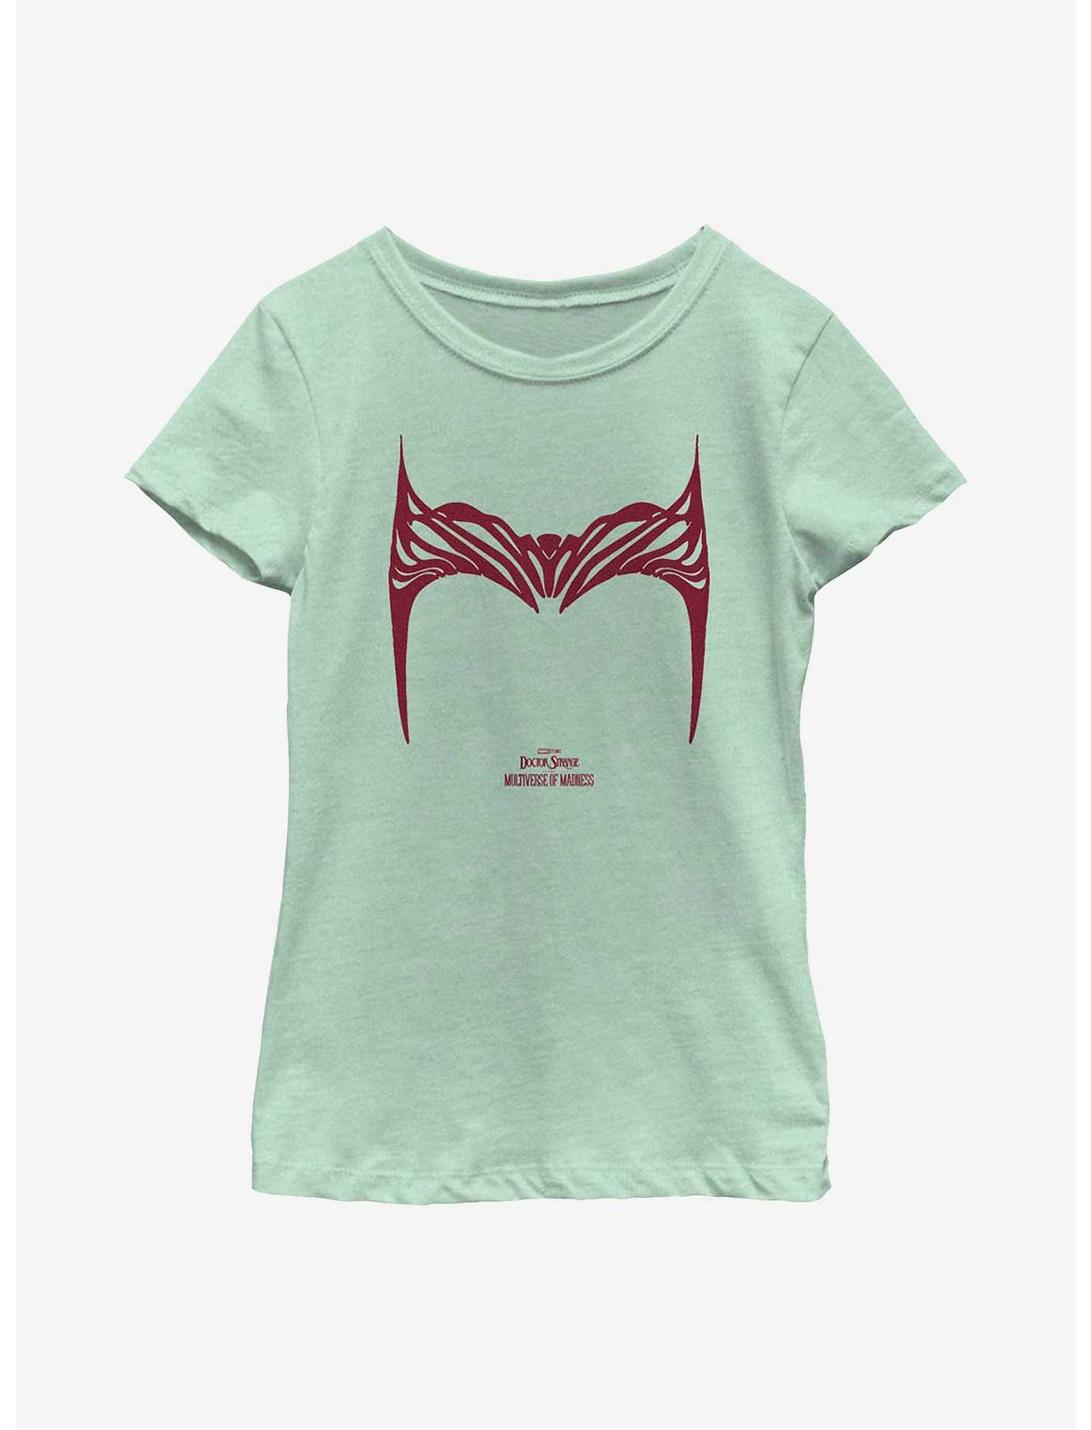 Marvel Doctor Strange In The Multiverse Of Madness Wanda Symbol Youth Girls T-Shirt, MINT, hi-res